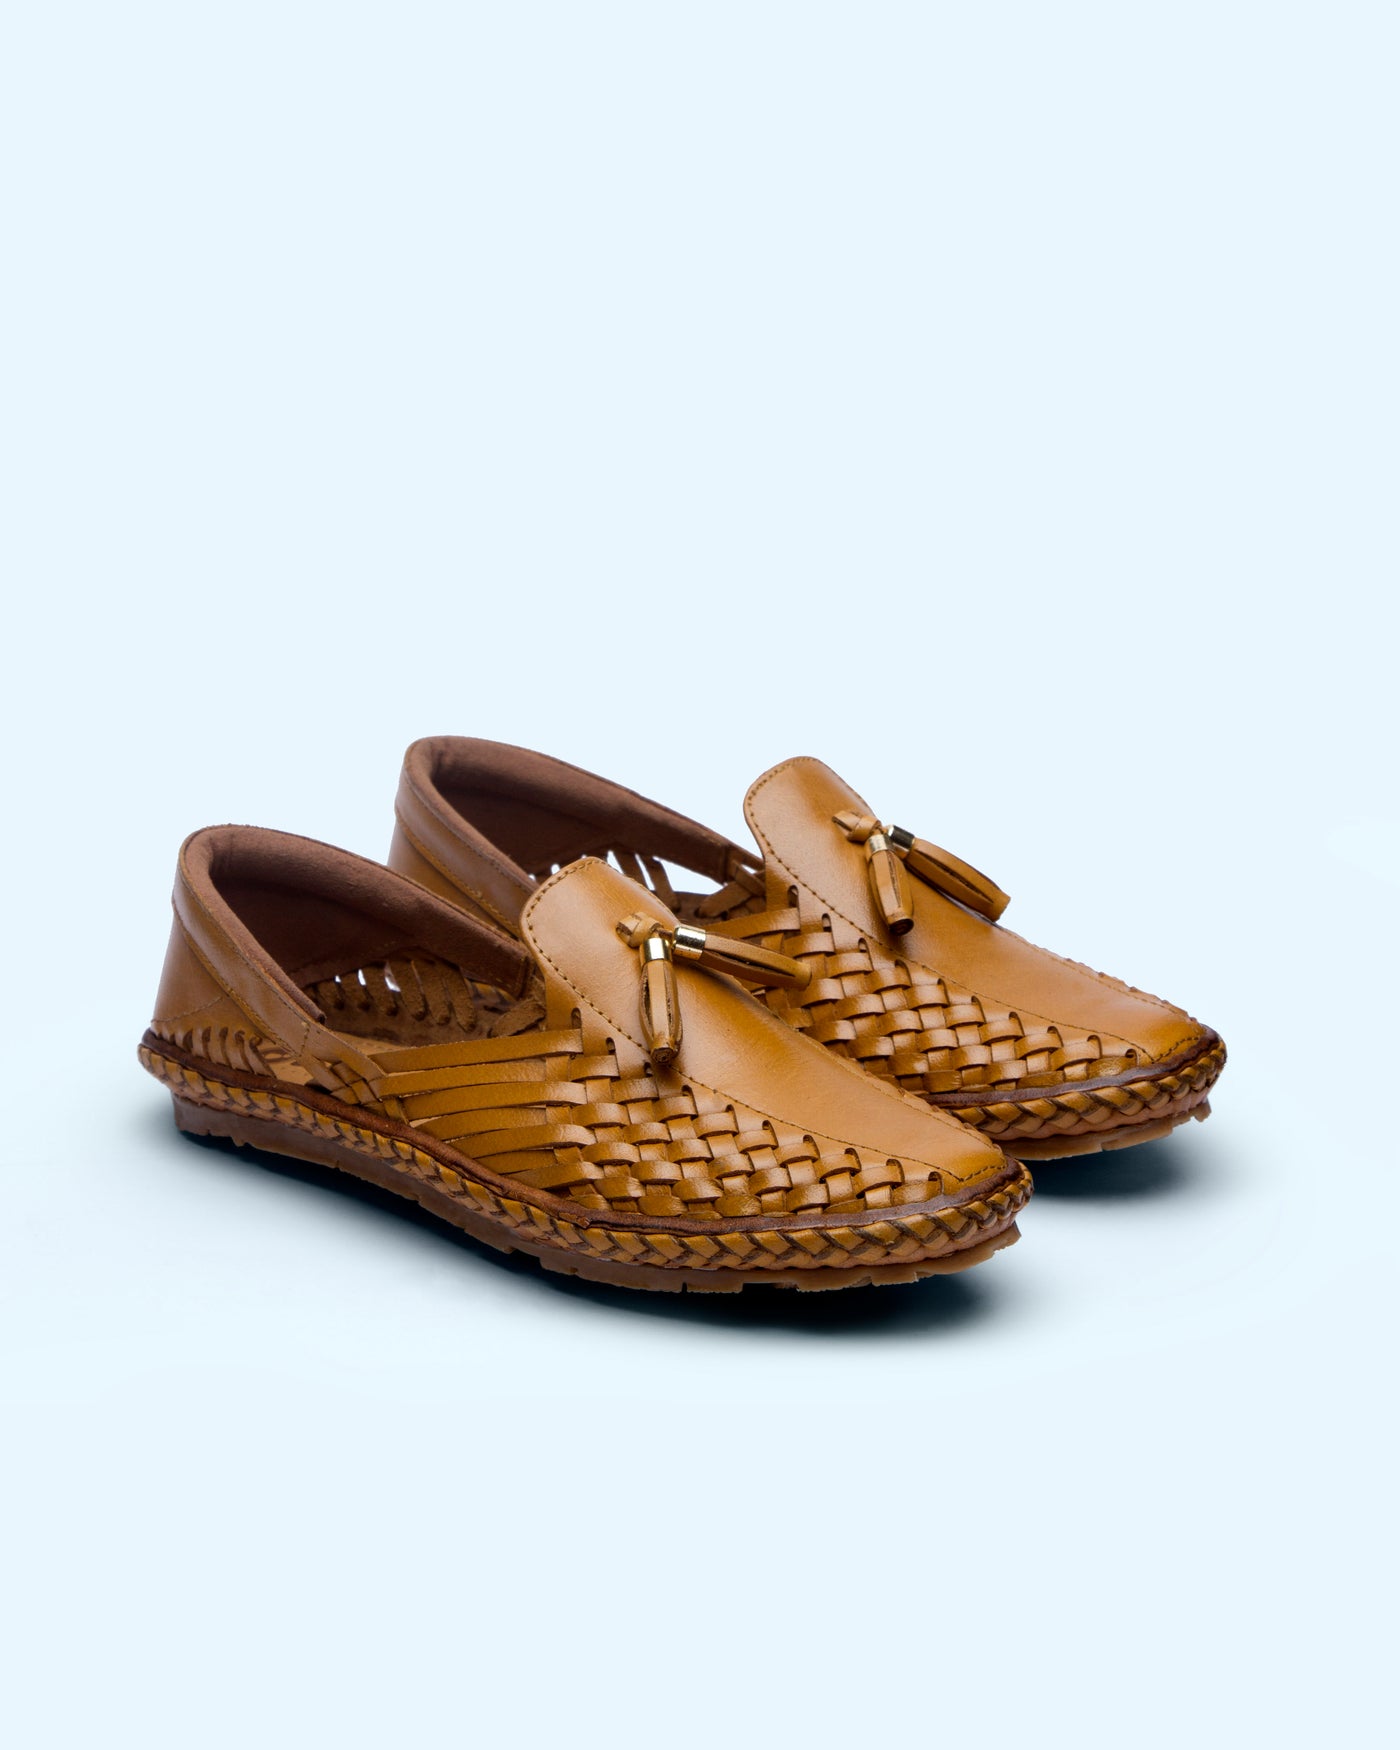 Fireworkshouse-handmade-leather-shoes-CHIEF NATURAL